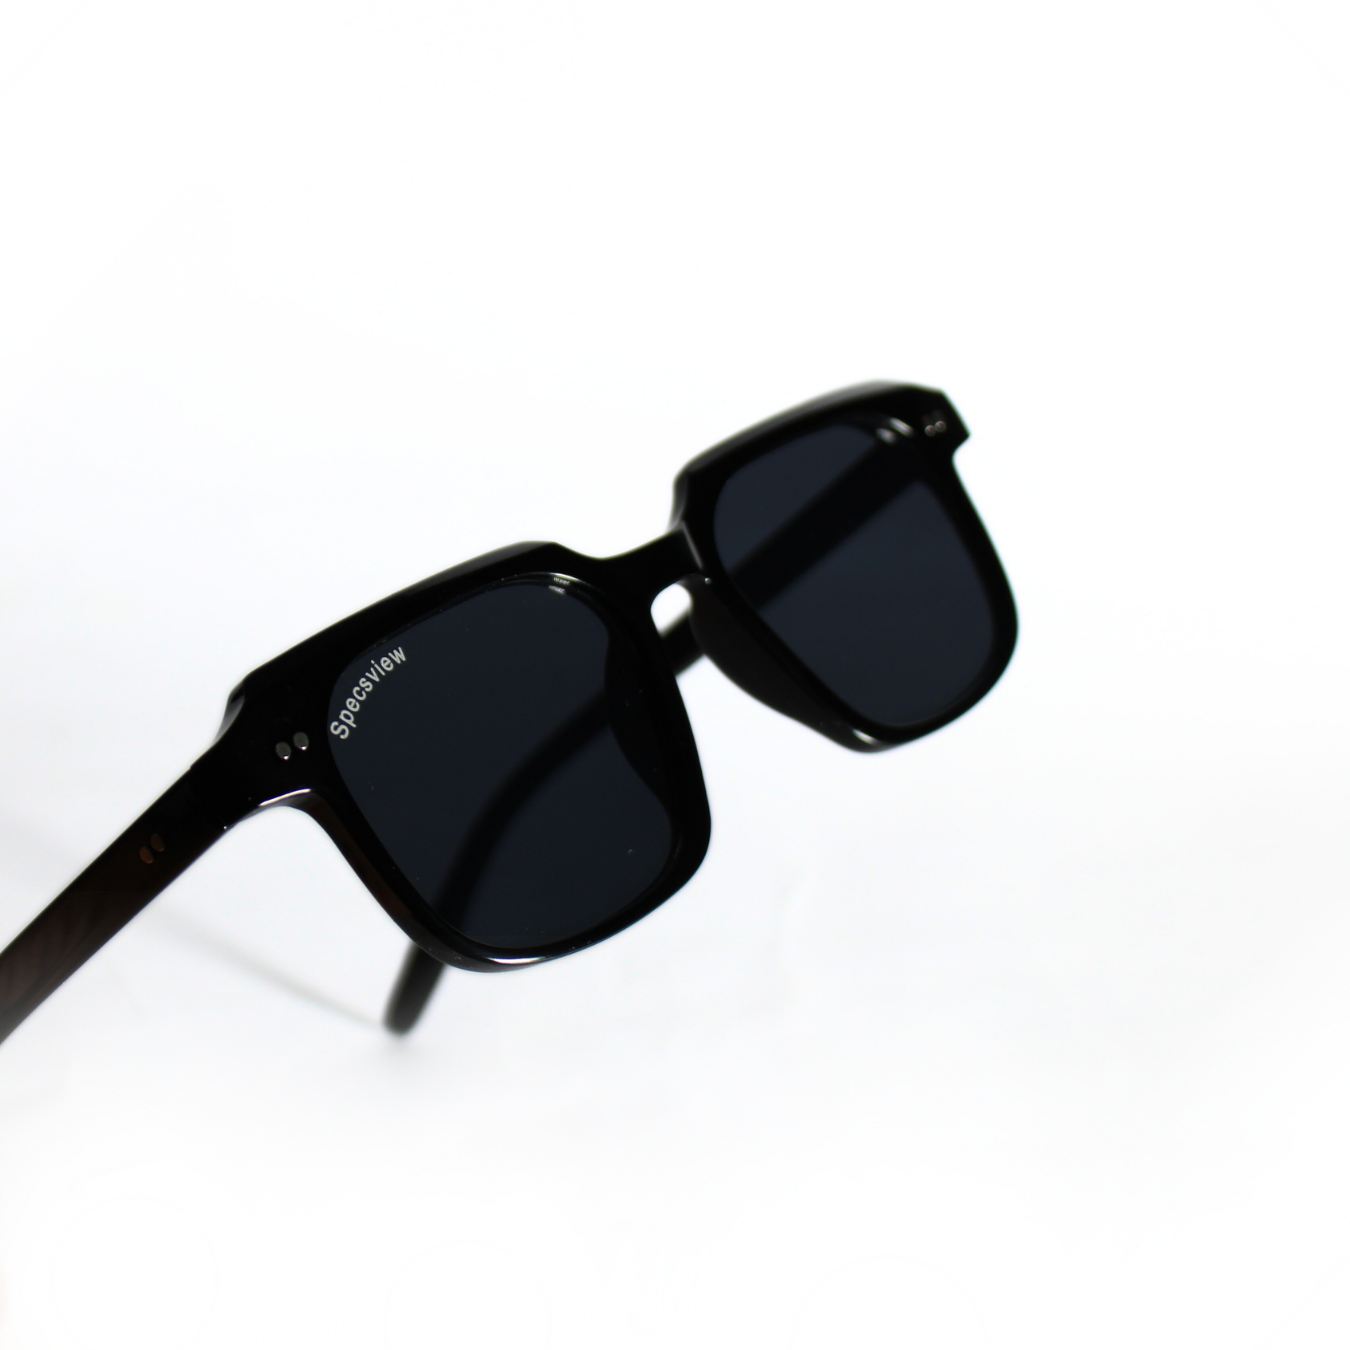 DIRK//002 I Sunglasses for Men and Women - Specsview